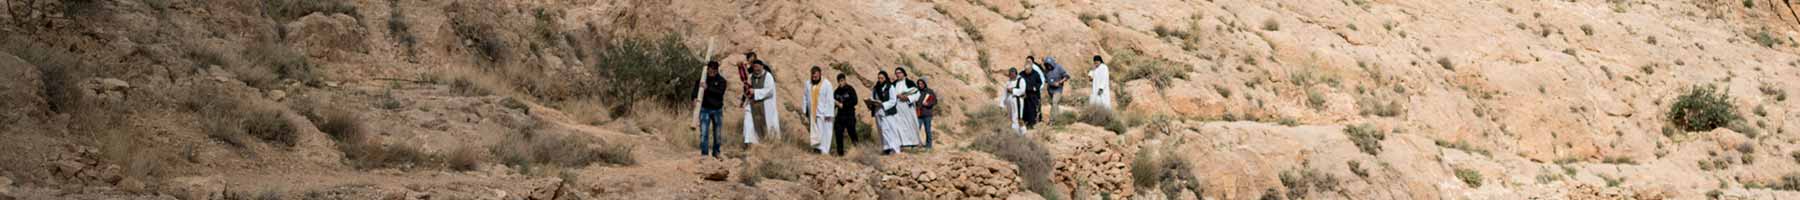 a procession of people on an arid mountainside